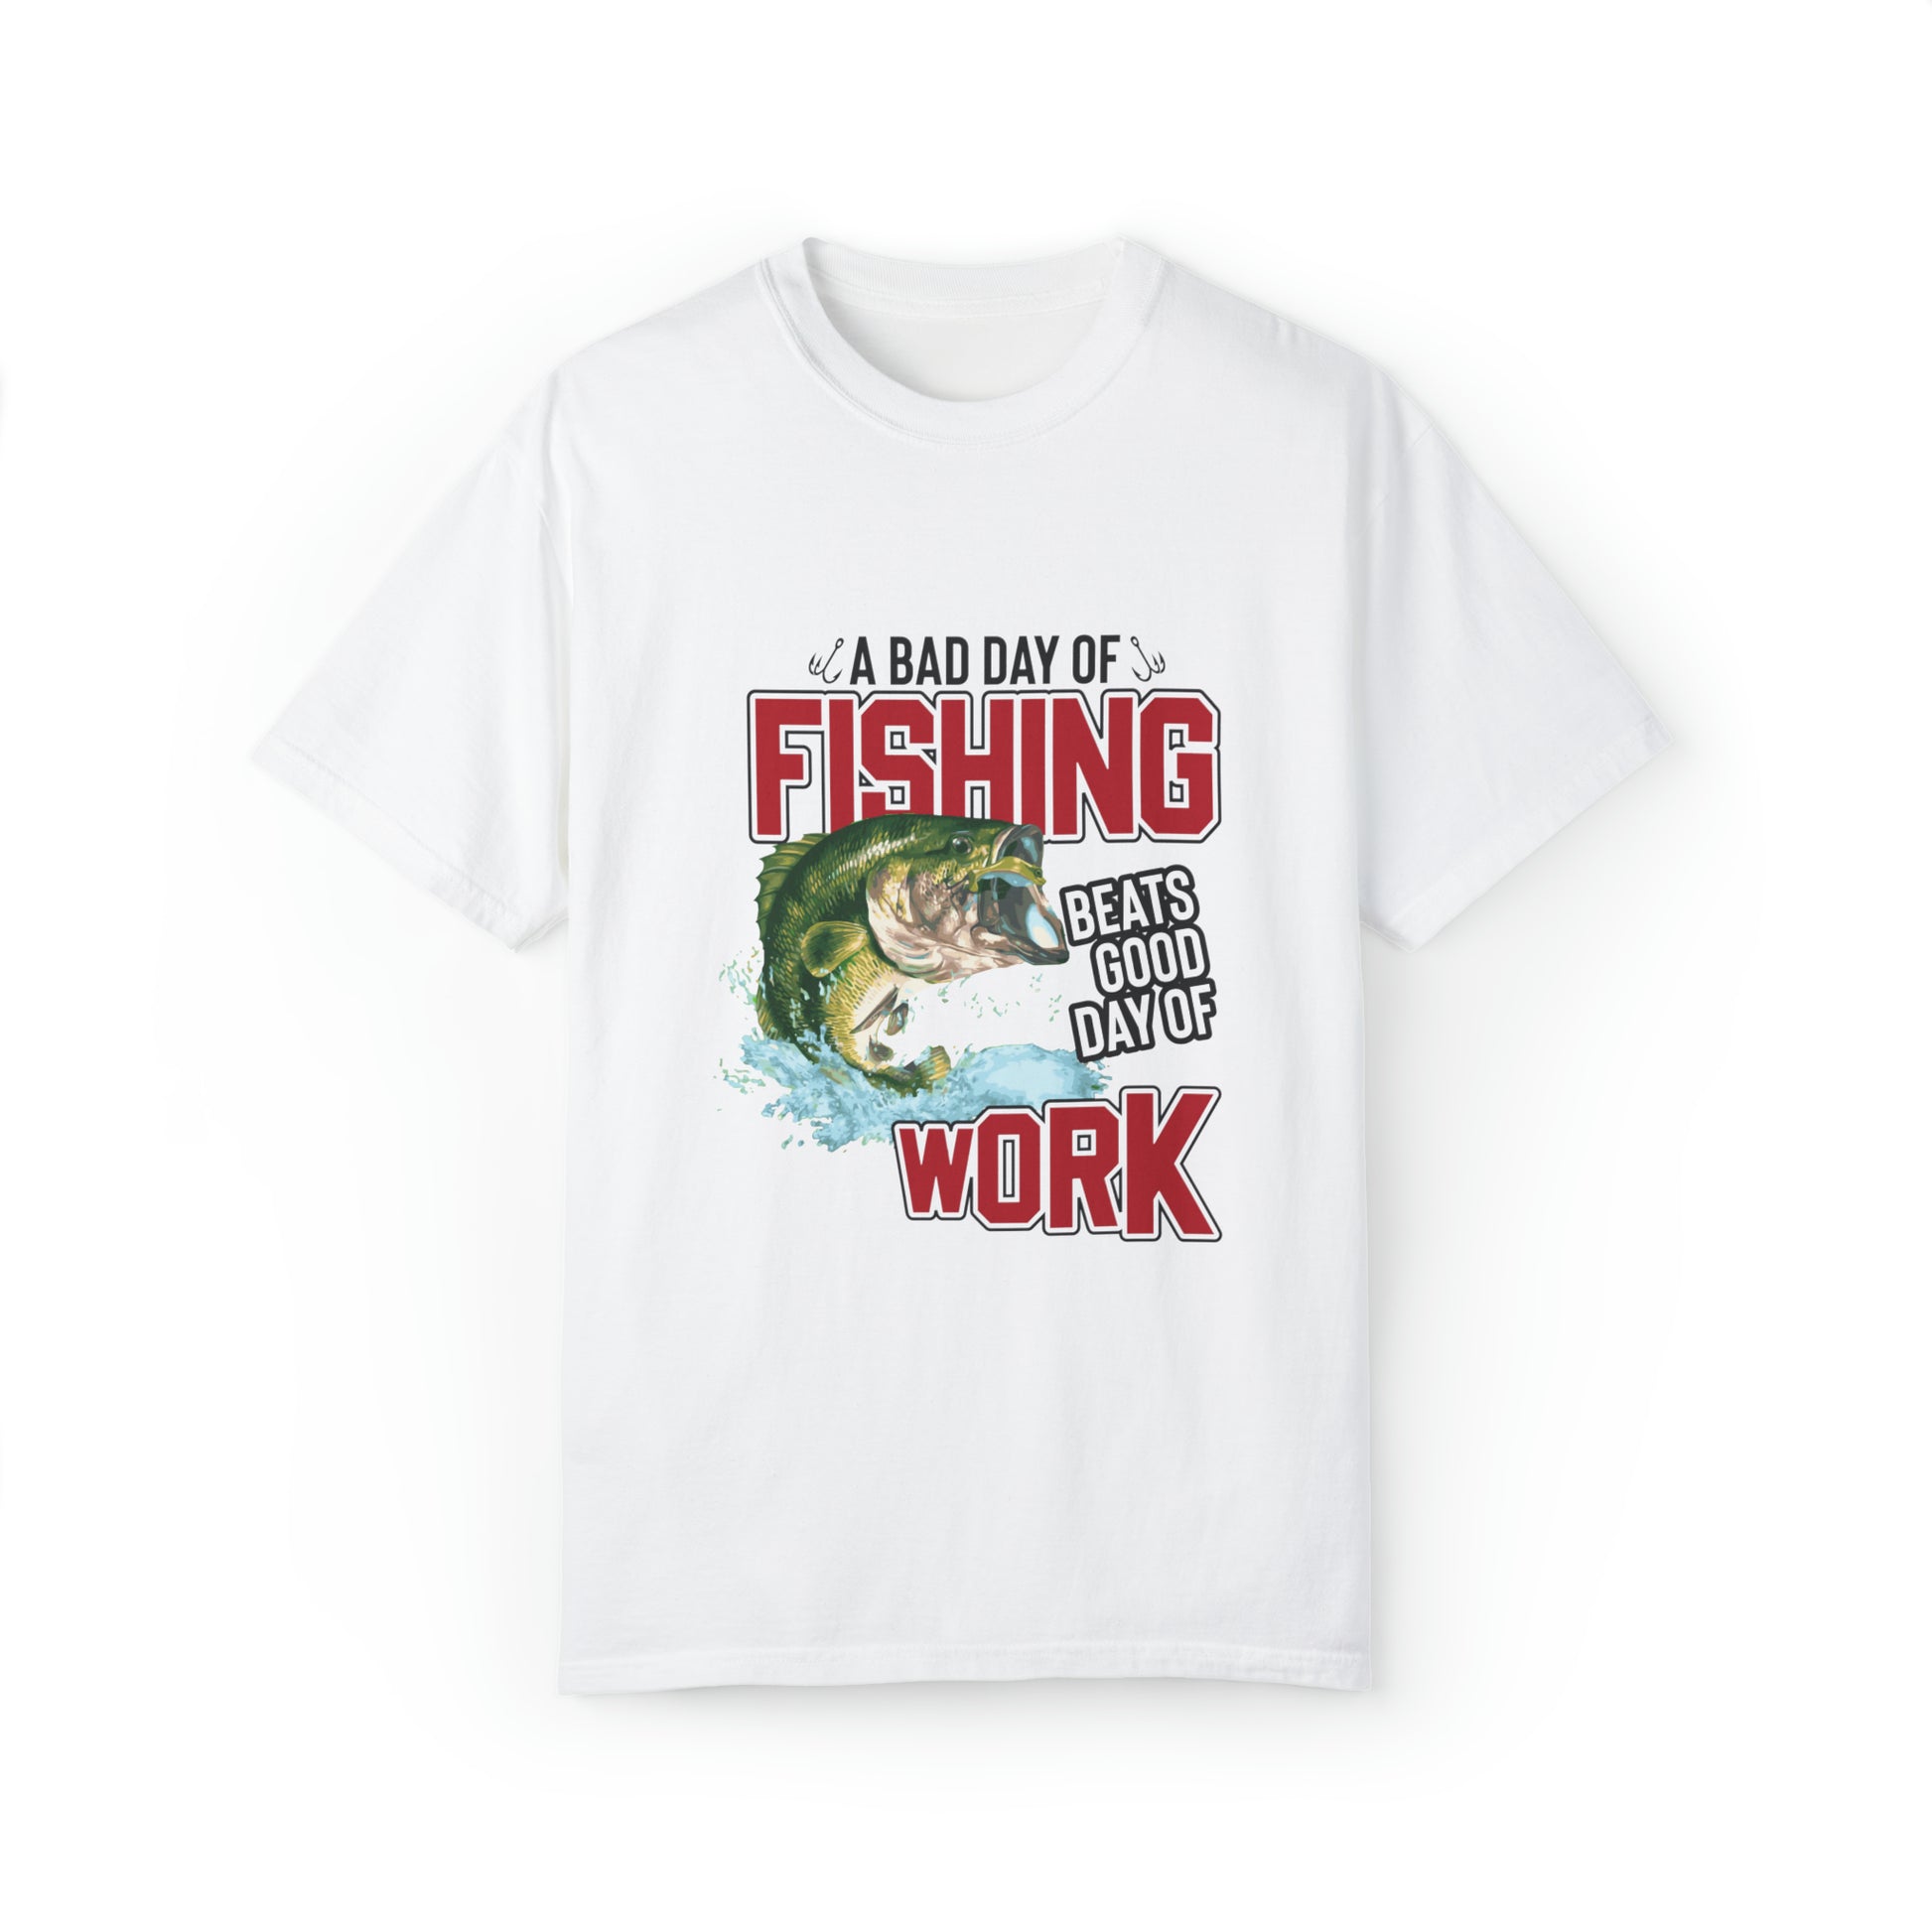 A bad day fishing beats good day of work shirt – Multi-Dimensions